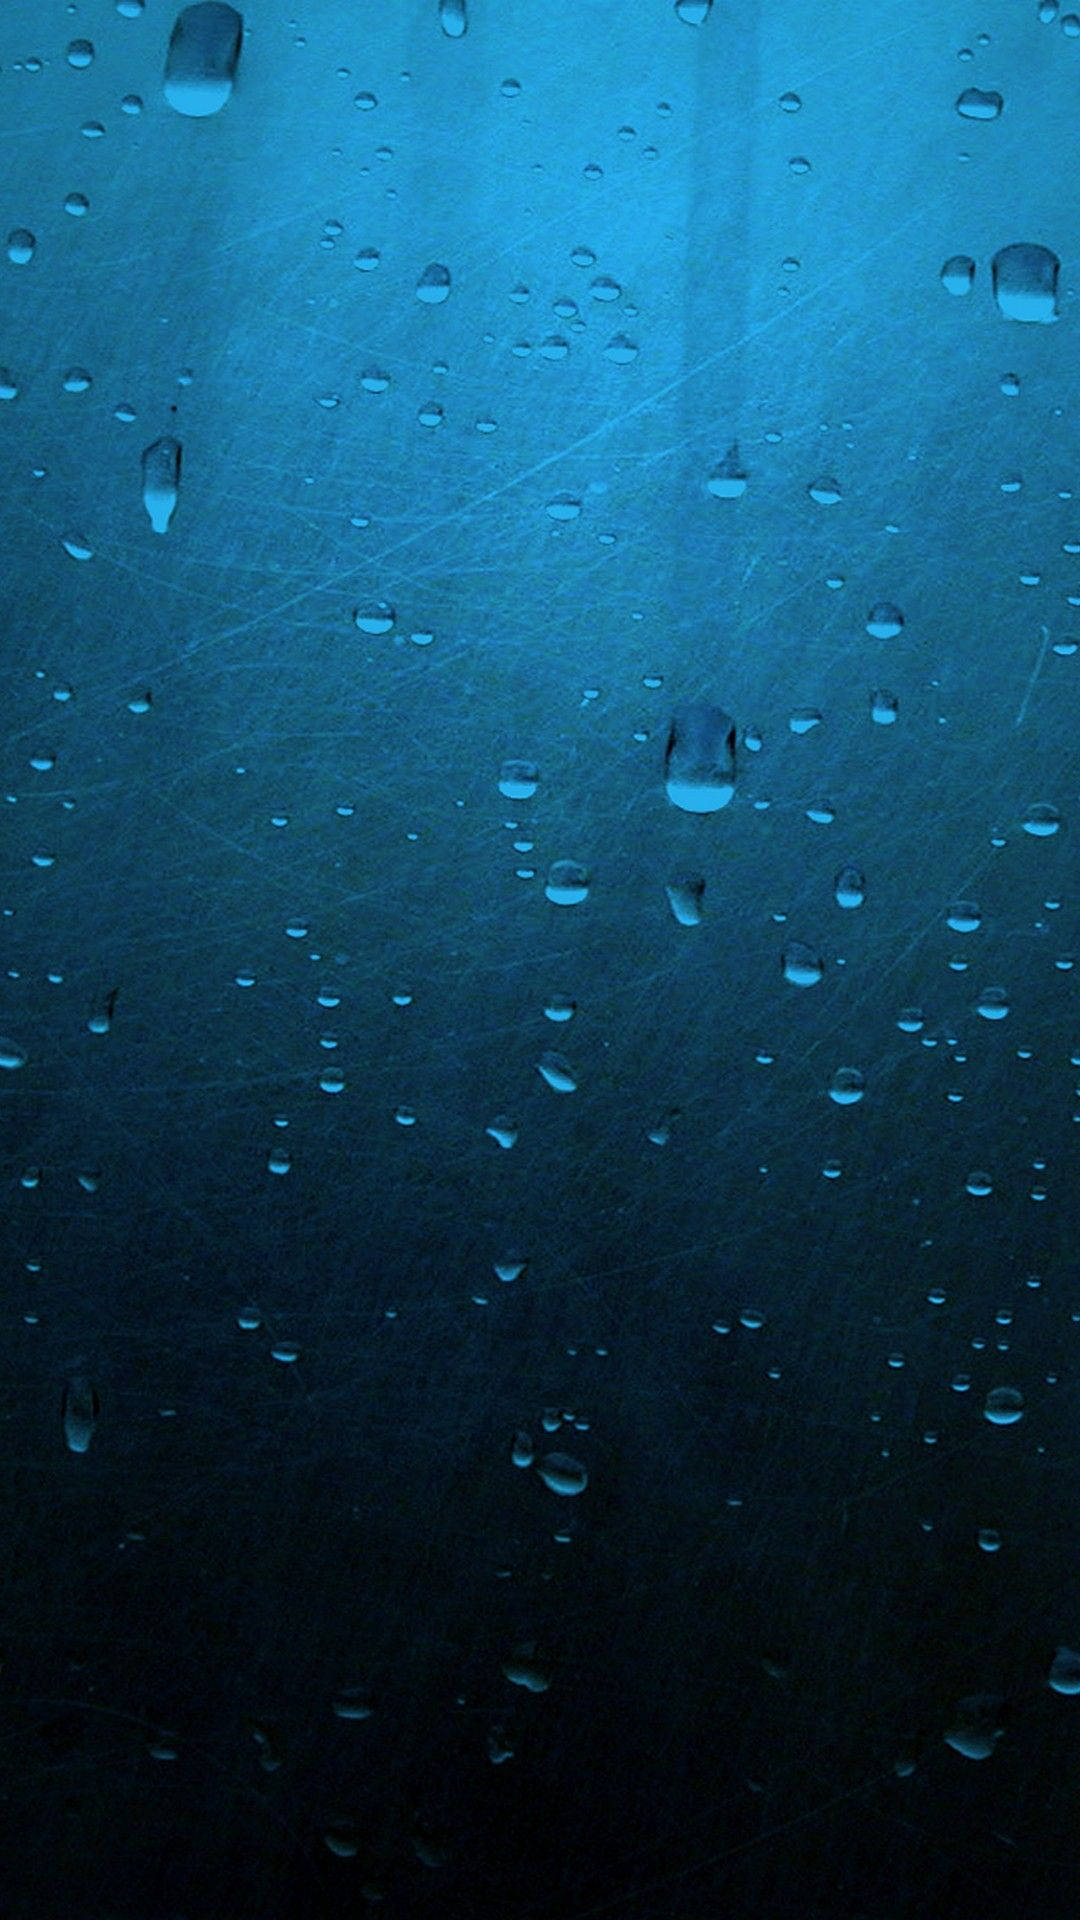 Enjoy the peace and serenity of the rain with your iPhone Wallpaper